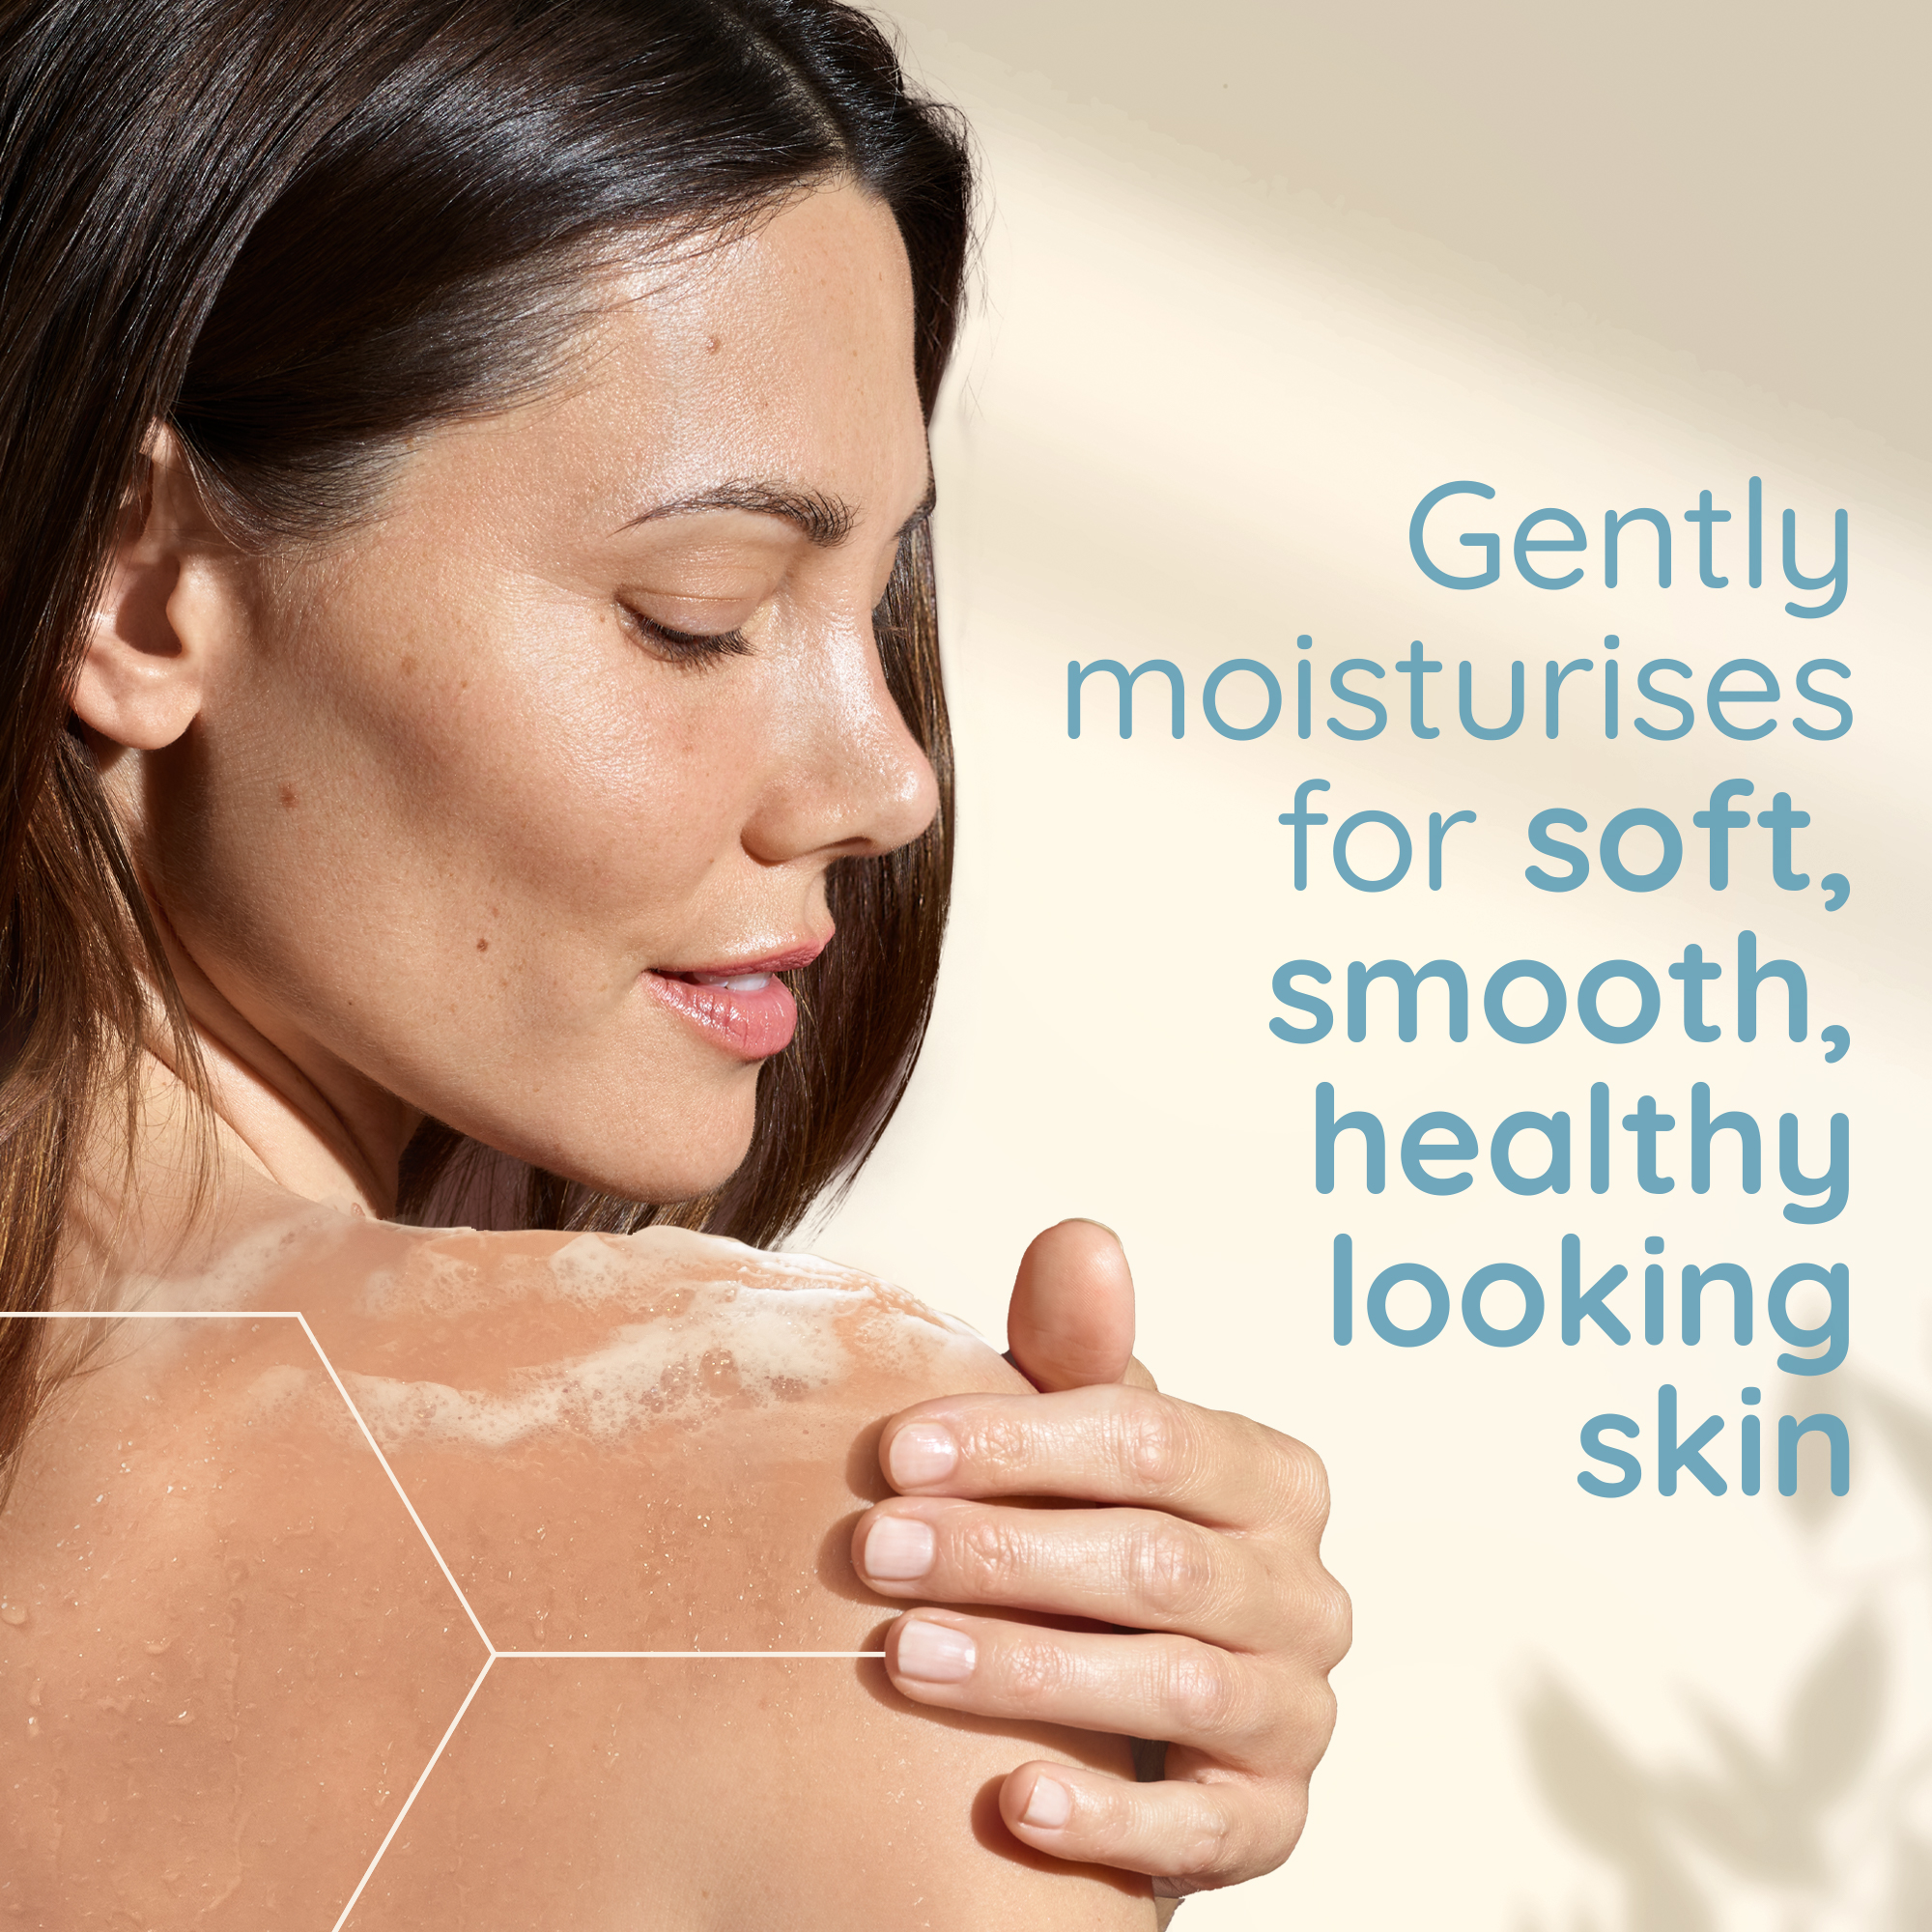 gently moisturises for soft, smooth, healthy-looking skin